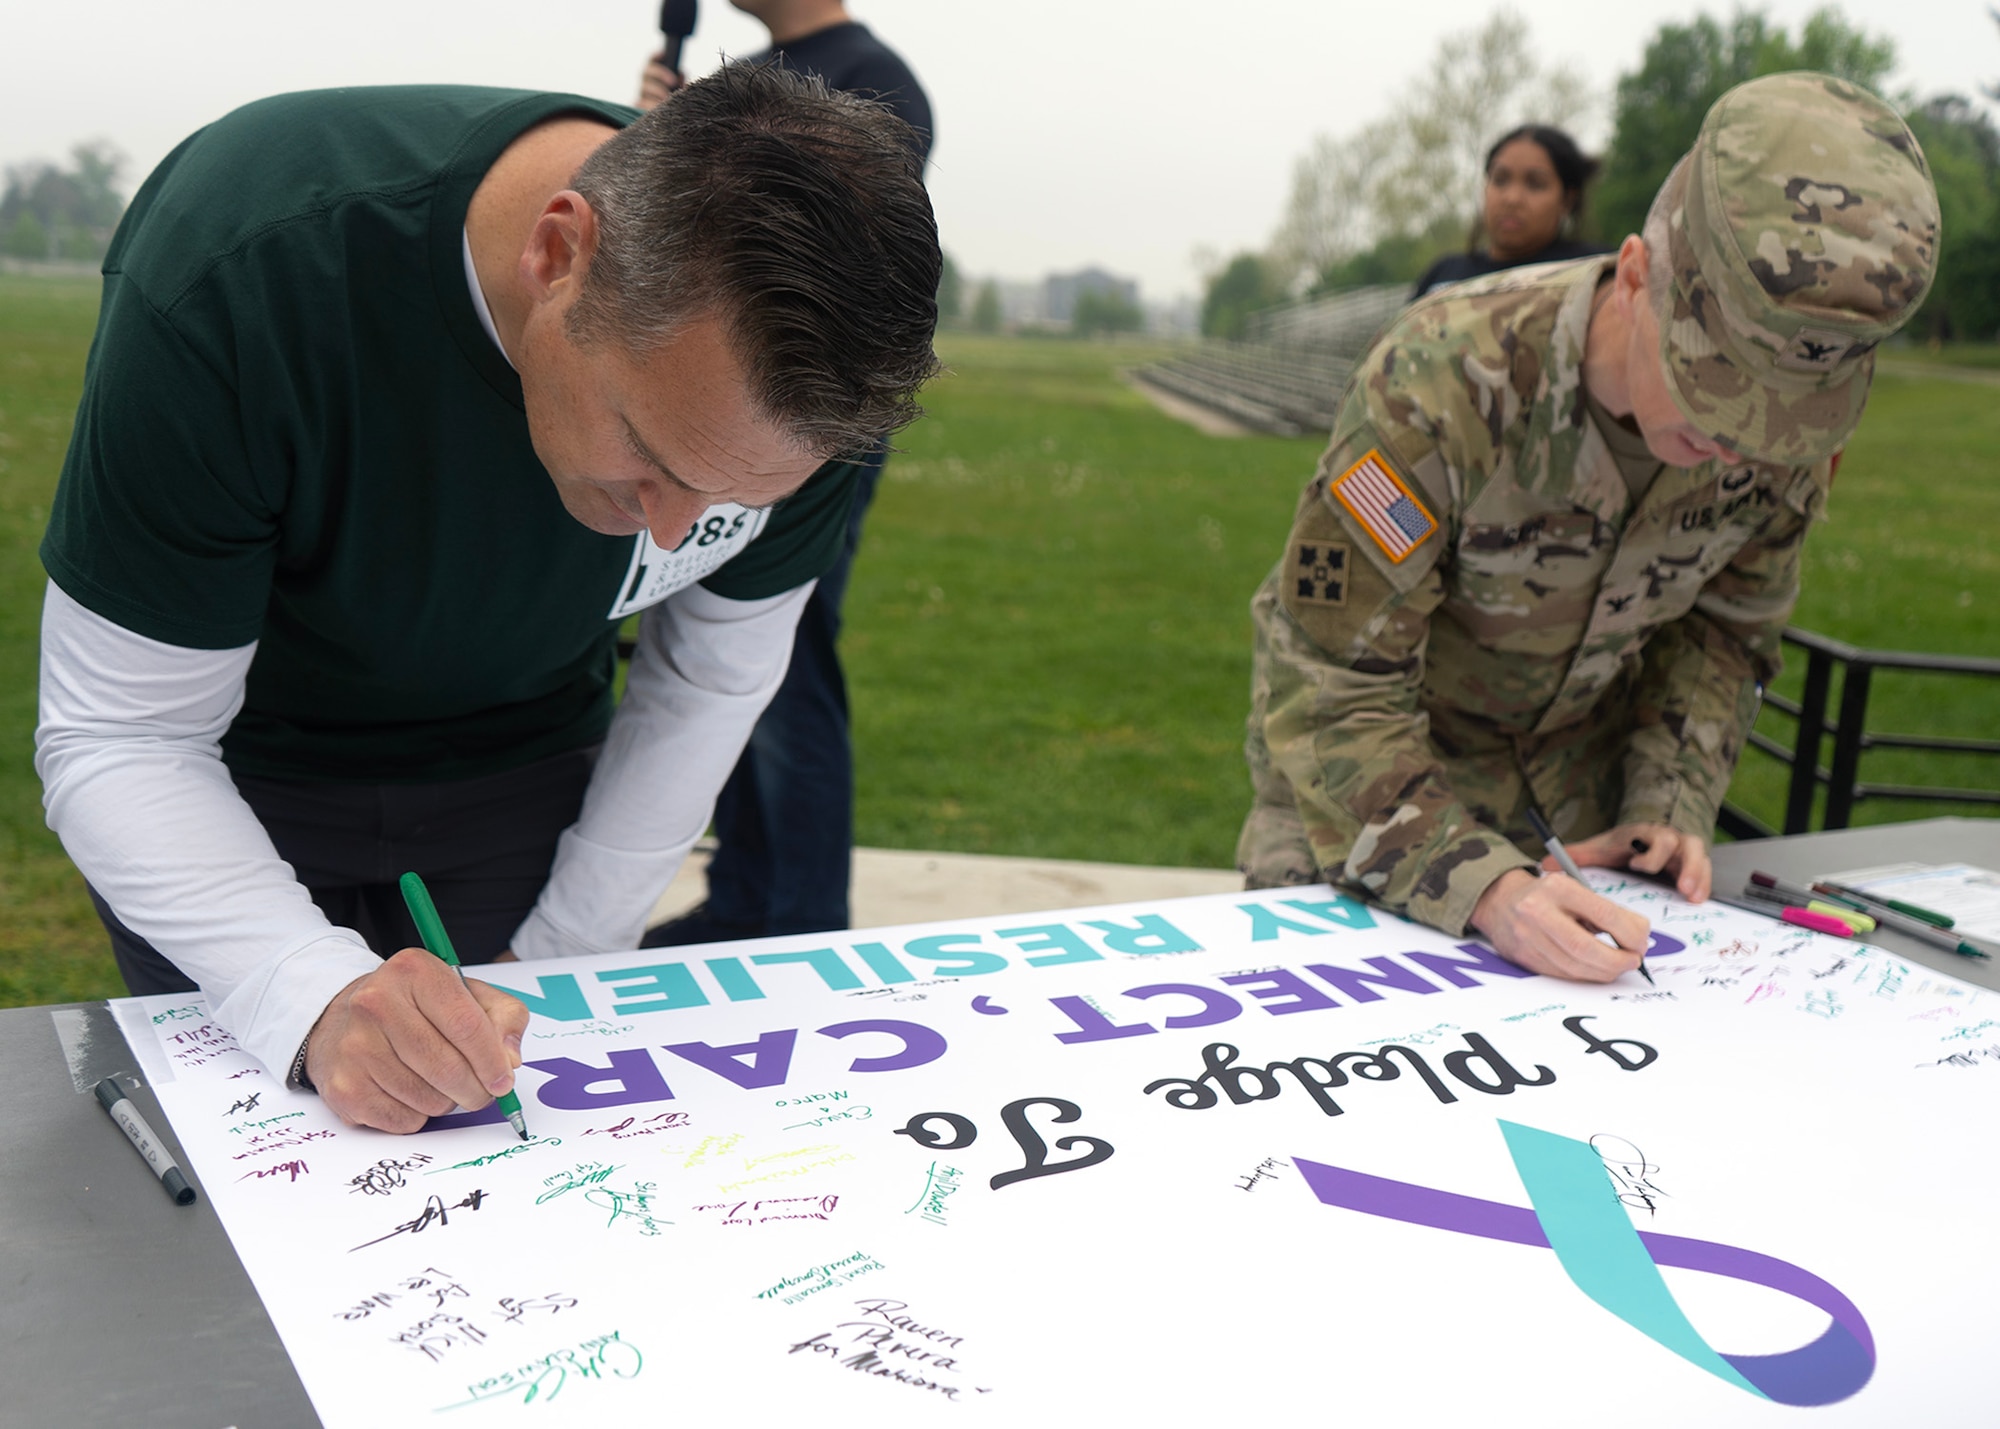 U.S. Air Force Col. Craig Miller, 70th Intelligence, Surveillance and Reconnaissance Wing commander, and U.S. Army Col. Michael Sapp, Fort George G. Meade garrison commander, sign a pledge during a Suicide Awareness Walk, April 21, 2023, at Fort Meade, Maryland. Both commanders pledged support to resiliency, honoring the friends and battle buddies lost, and gaining the tools and resources necessary to support one another. (U.S. Air Force photo by Staff Sgt. Kevin Iinuma)